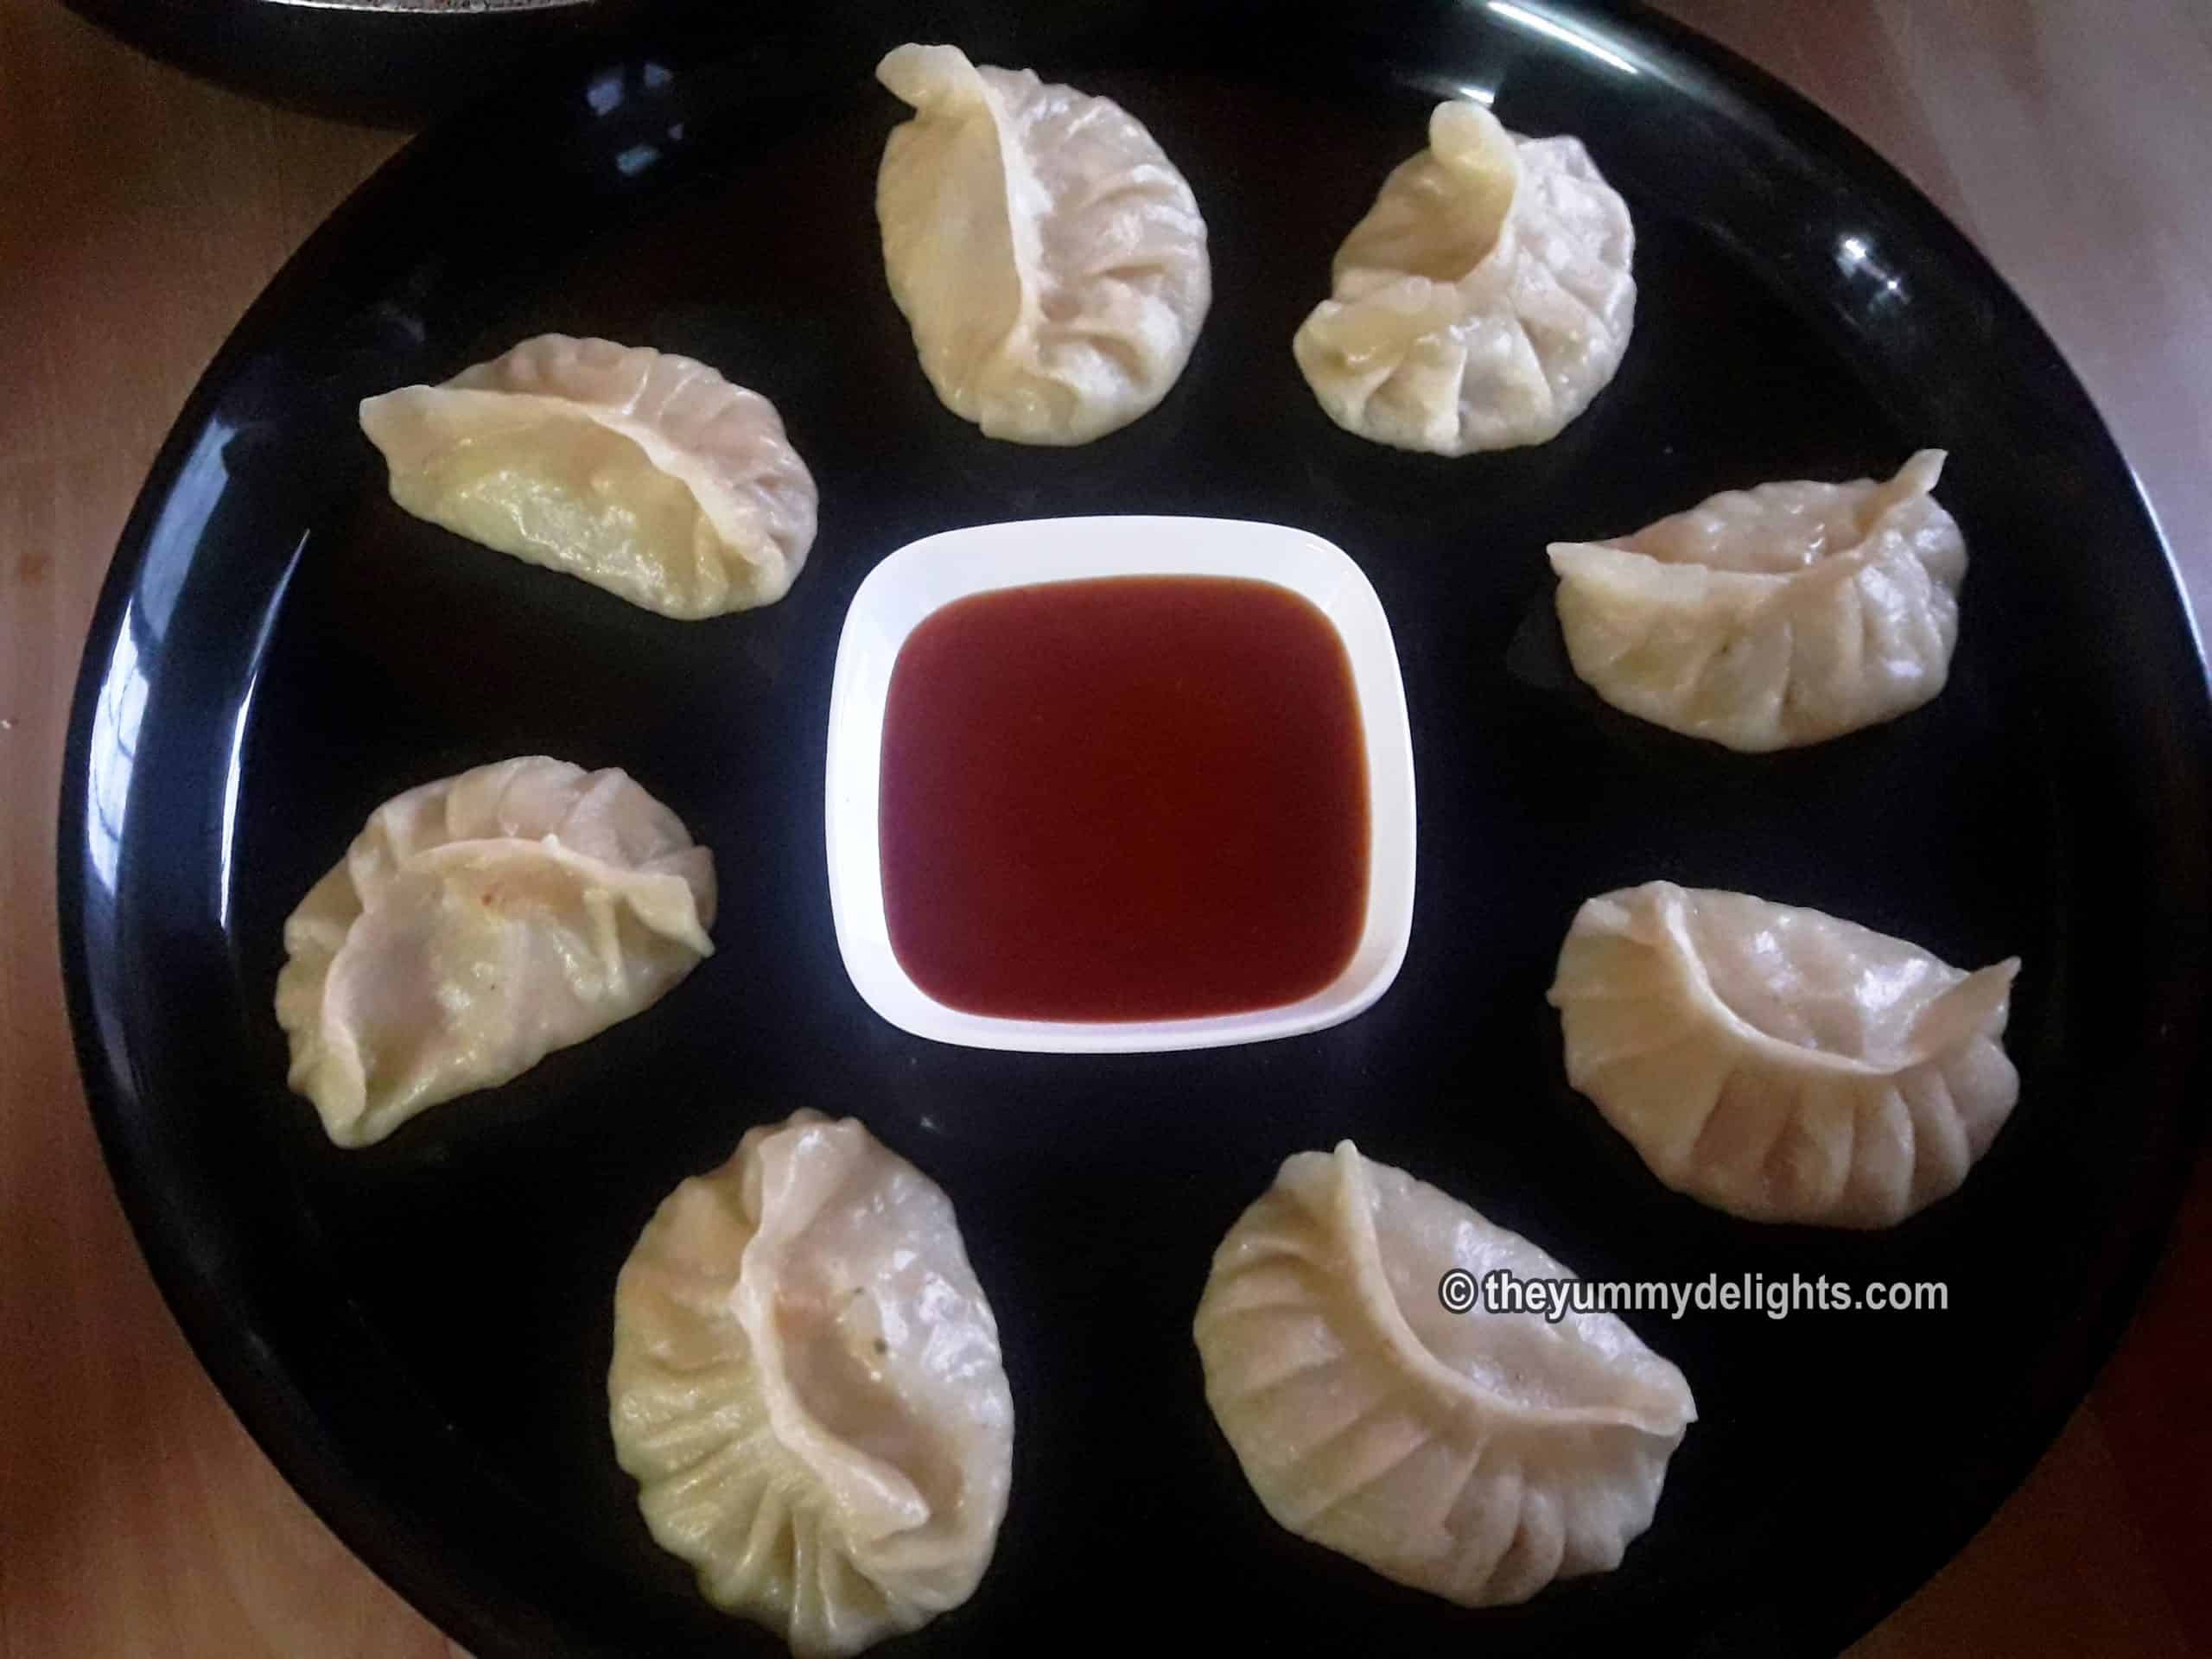 Veg momos served in a plate with spicy tomato sauce.